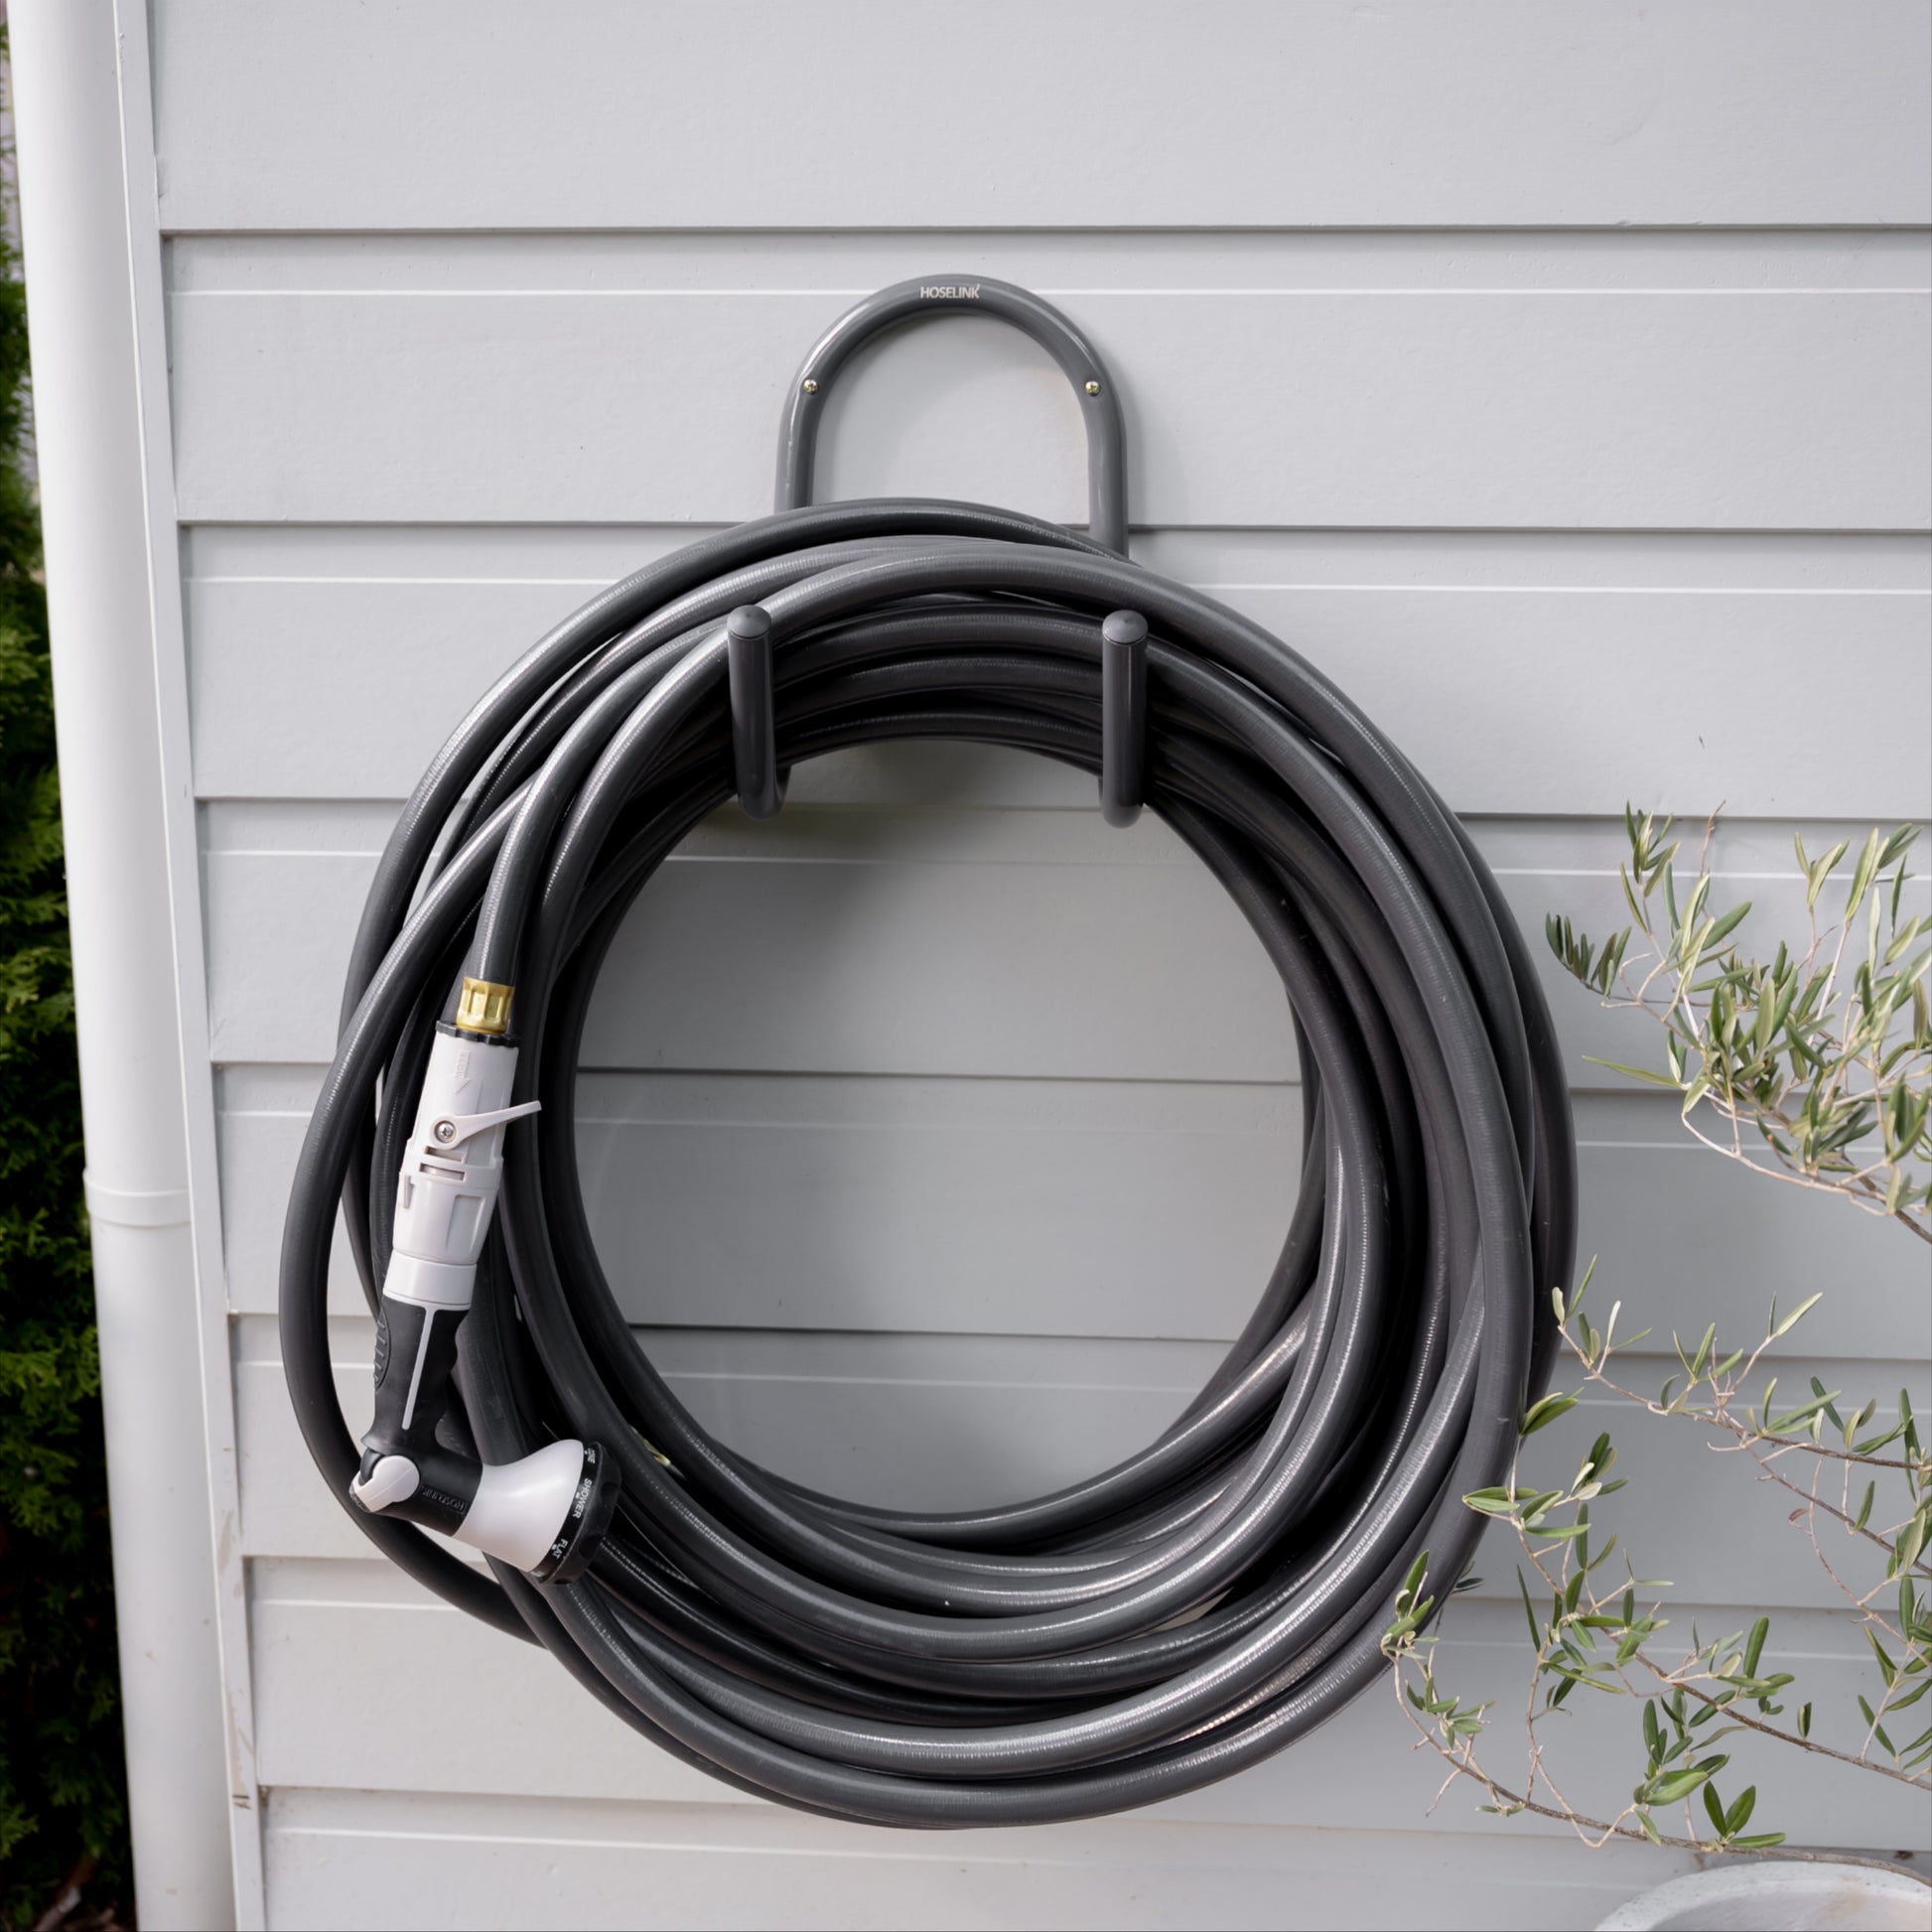 Charcoal hose and hanger mounted on white weatherboard wall